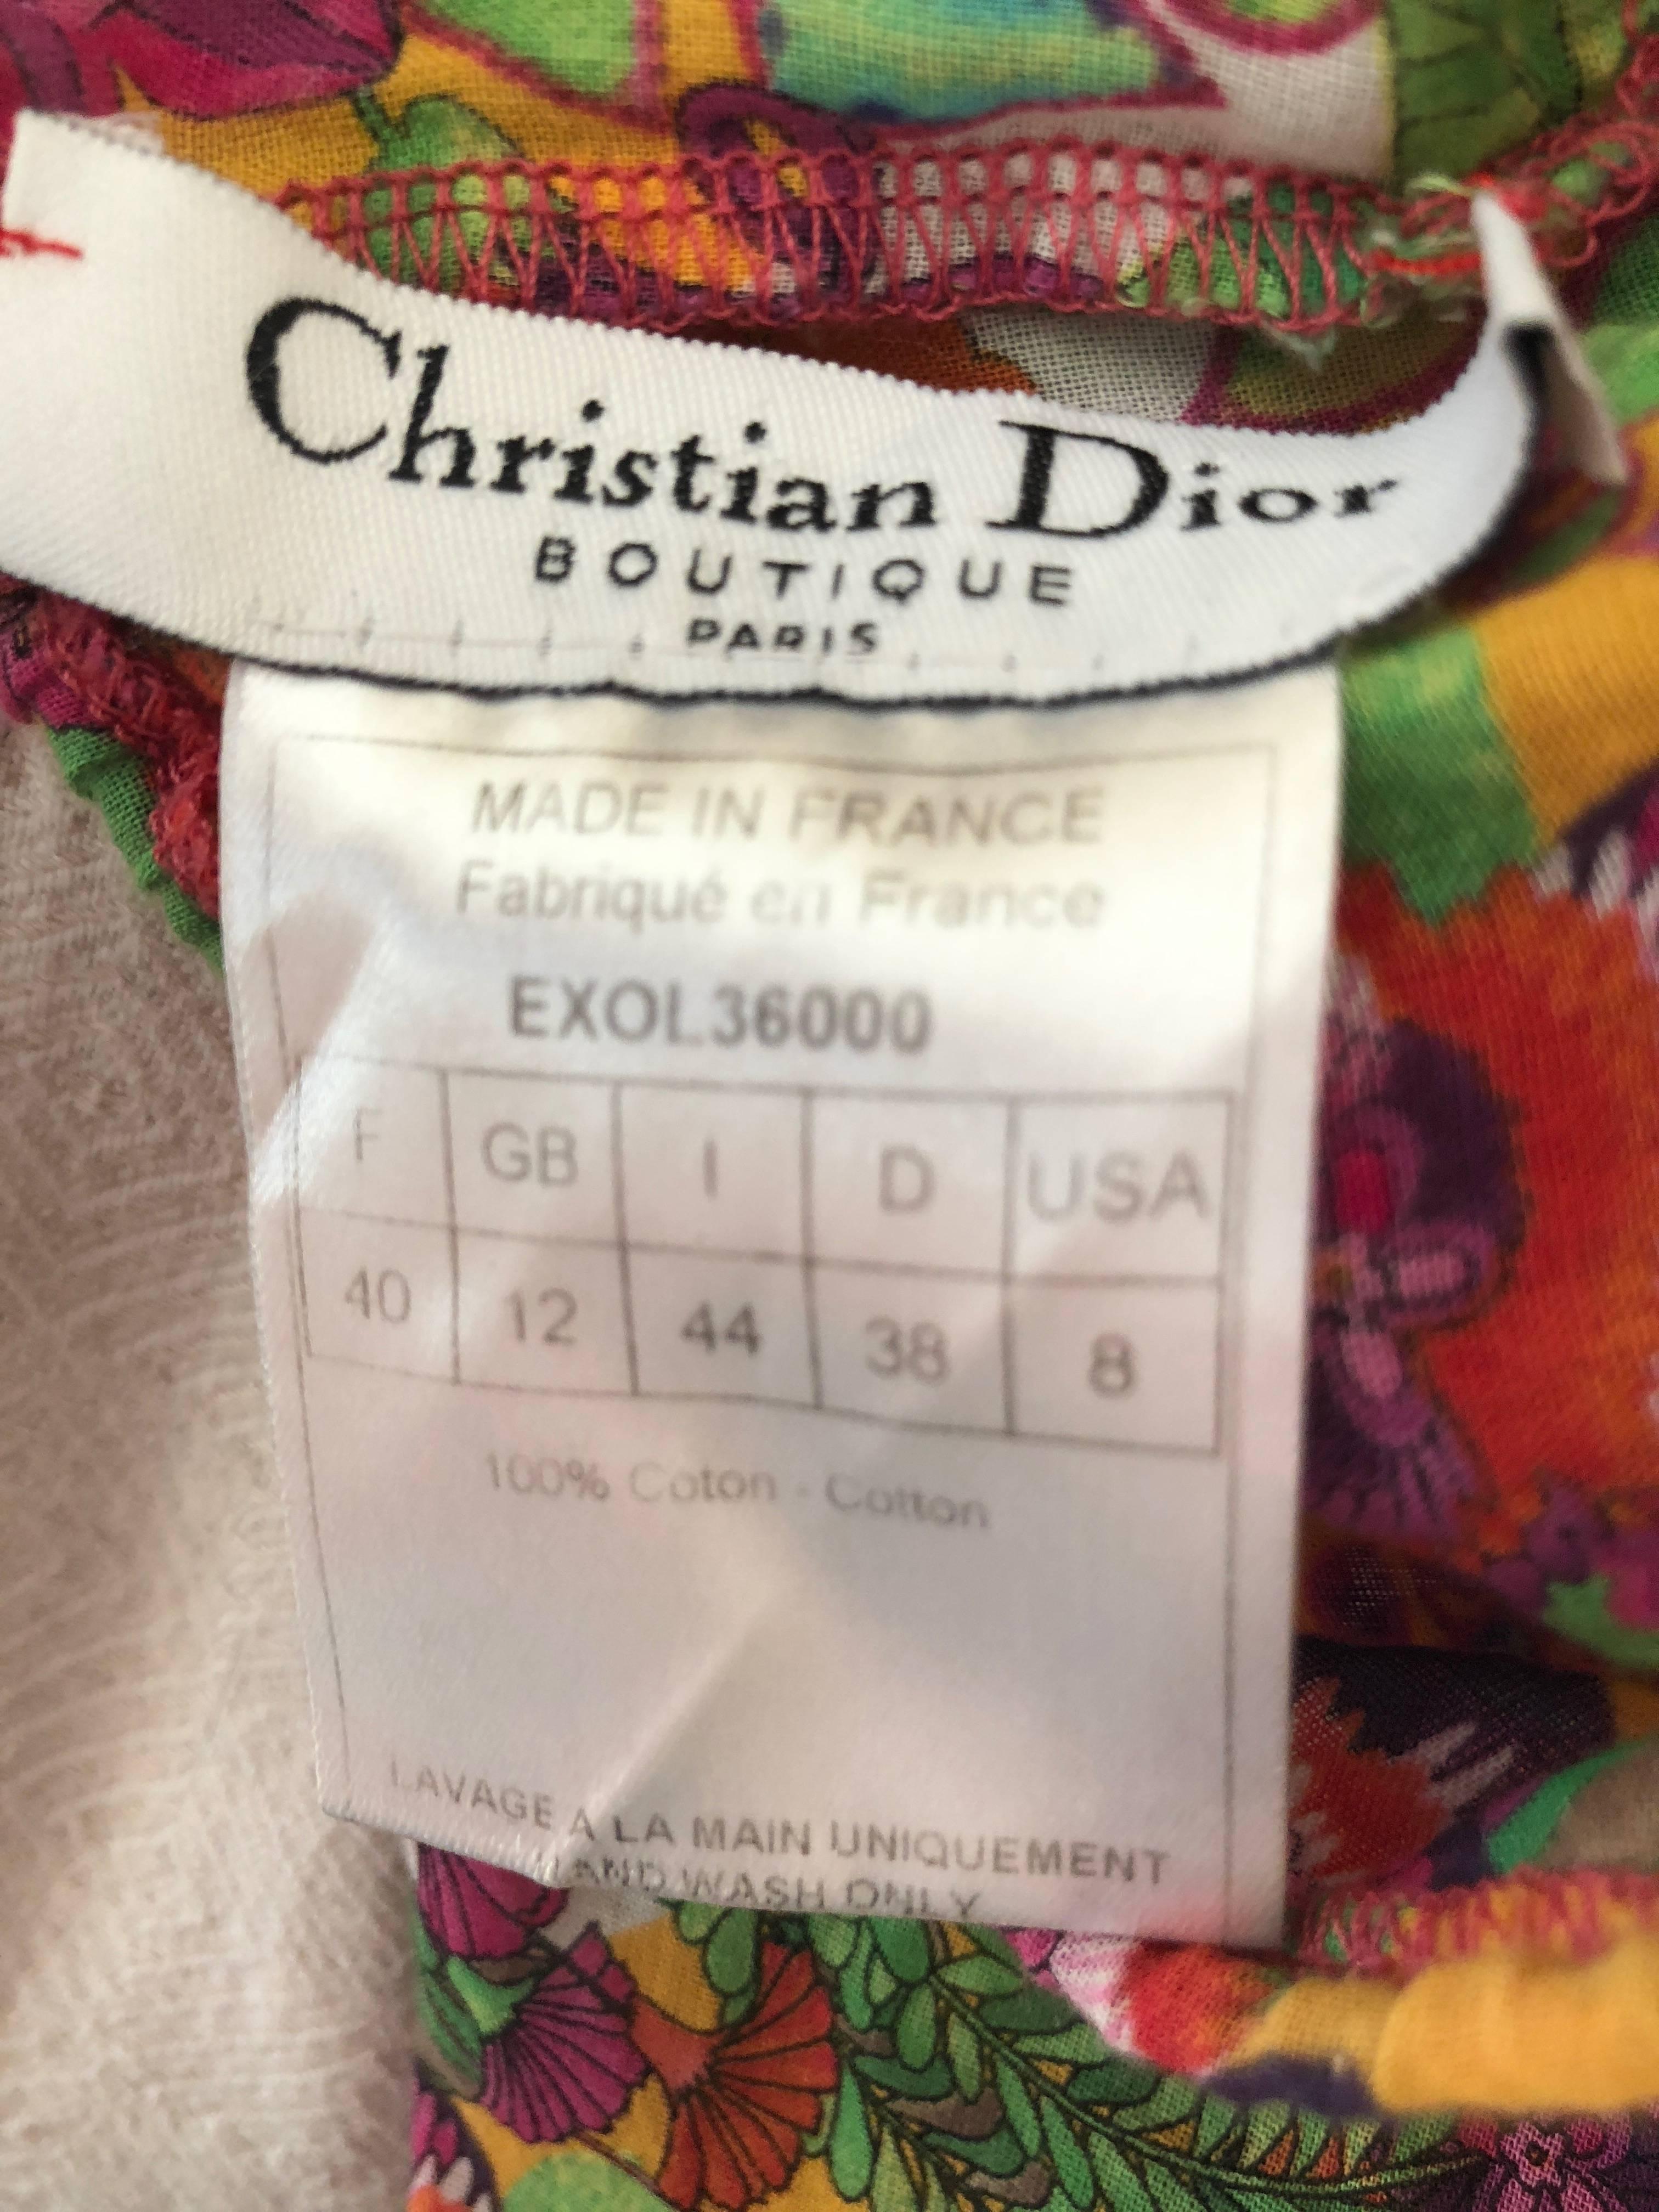 Christian Dior by John Galliano Colorful Cotton Mini Dress
So sweet with Dior 